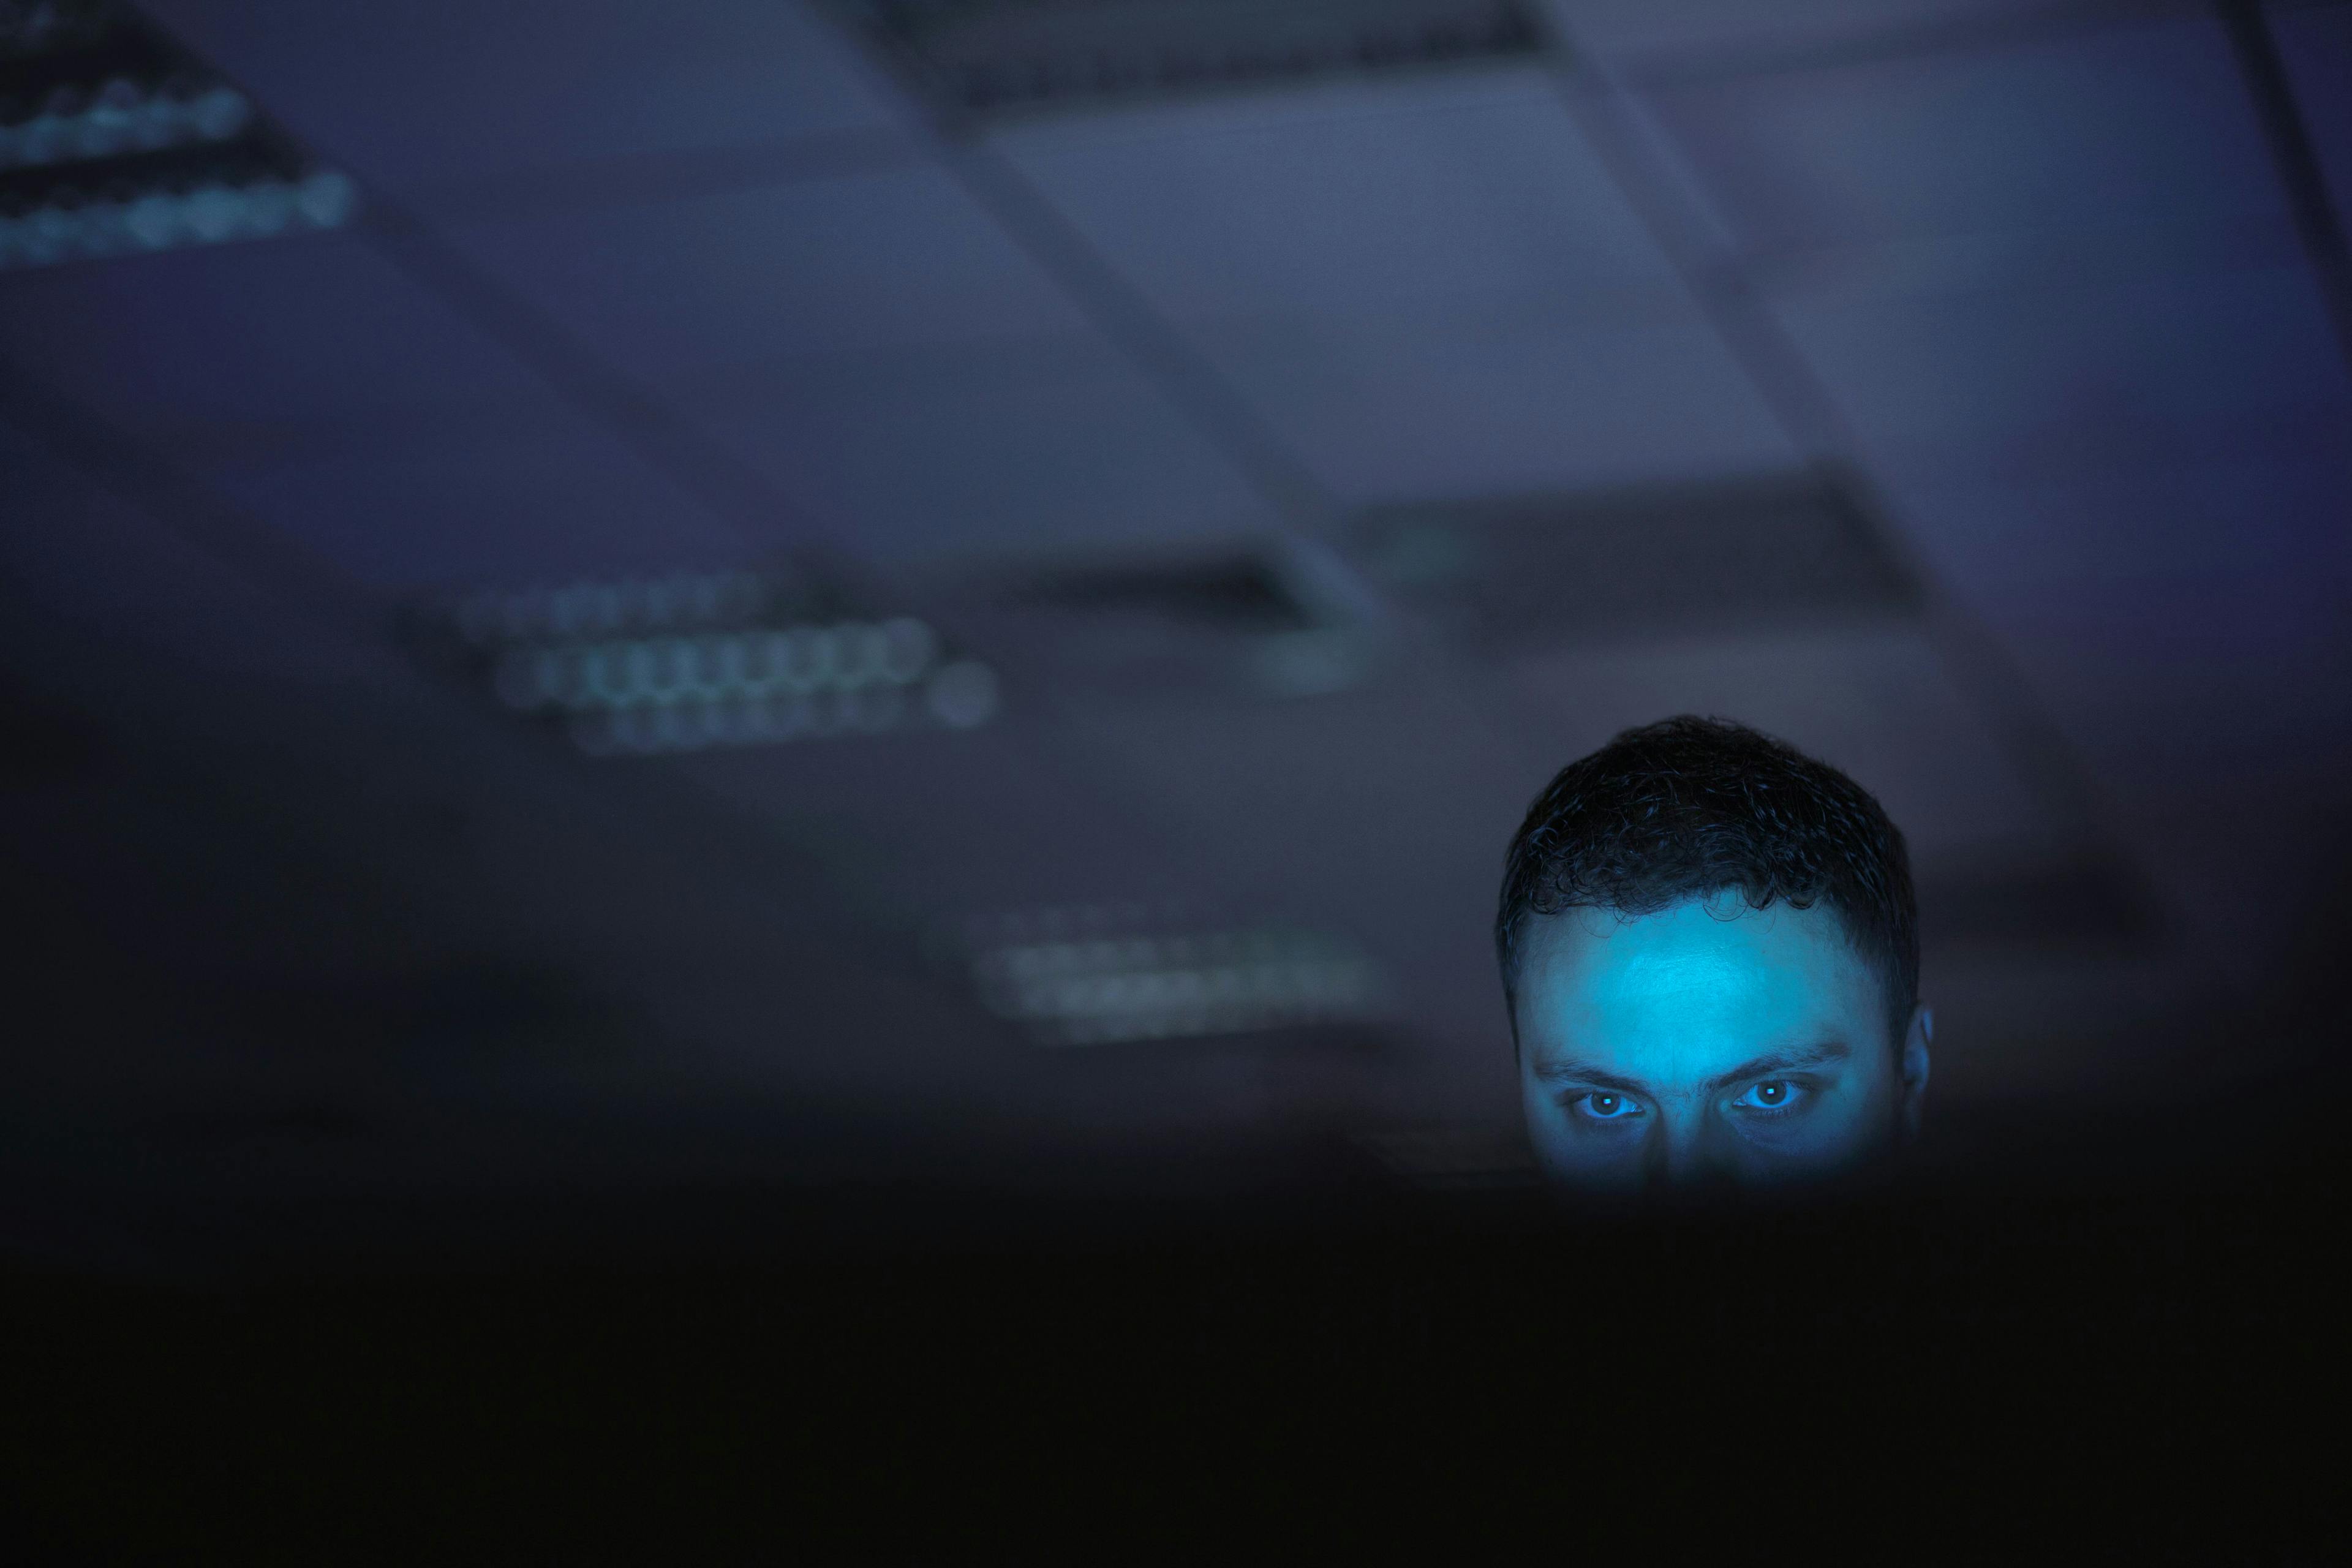 A person uses a computer in a darkened office.